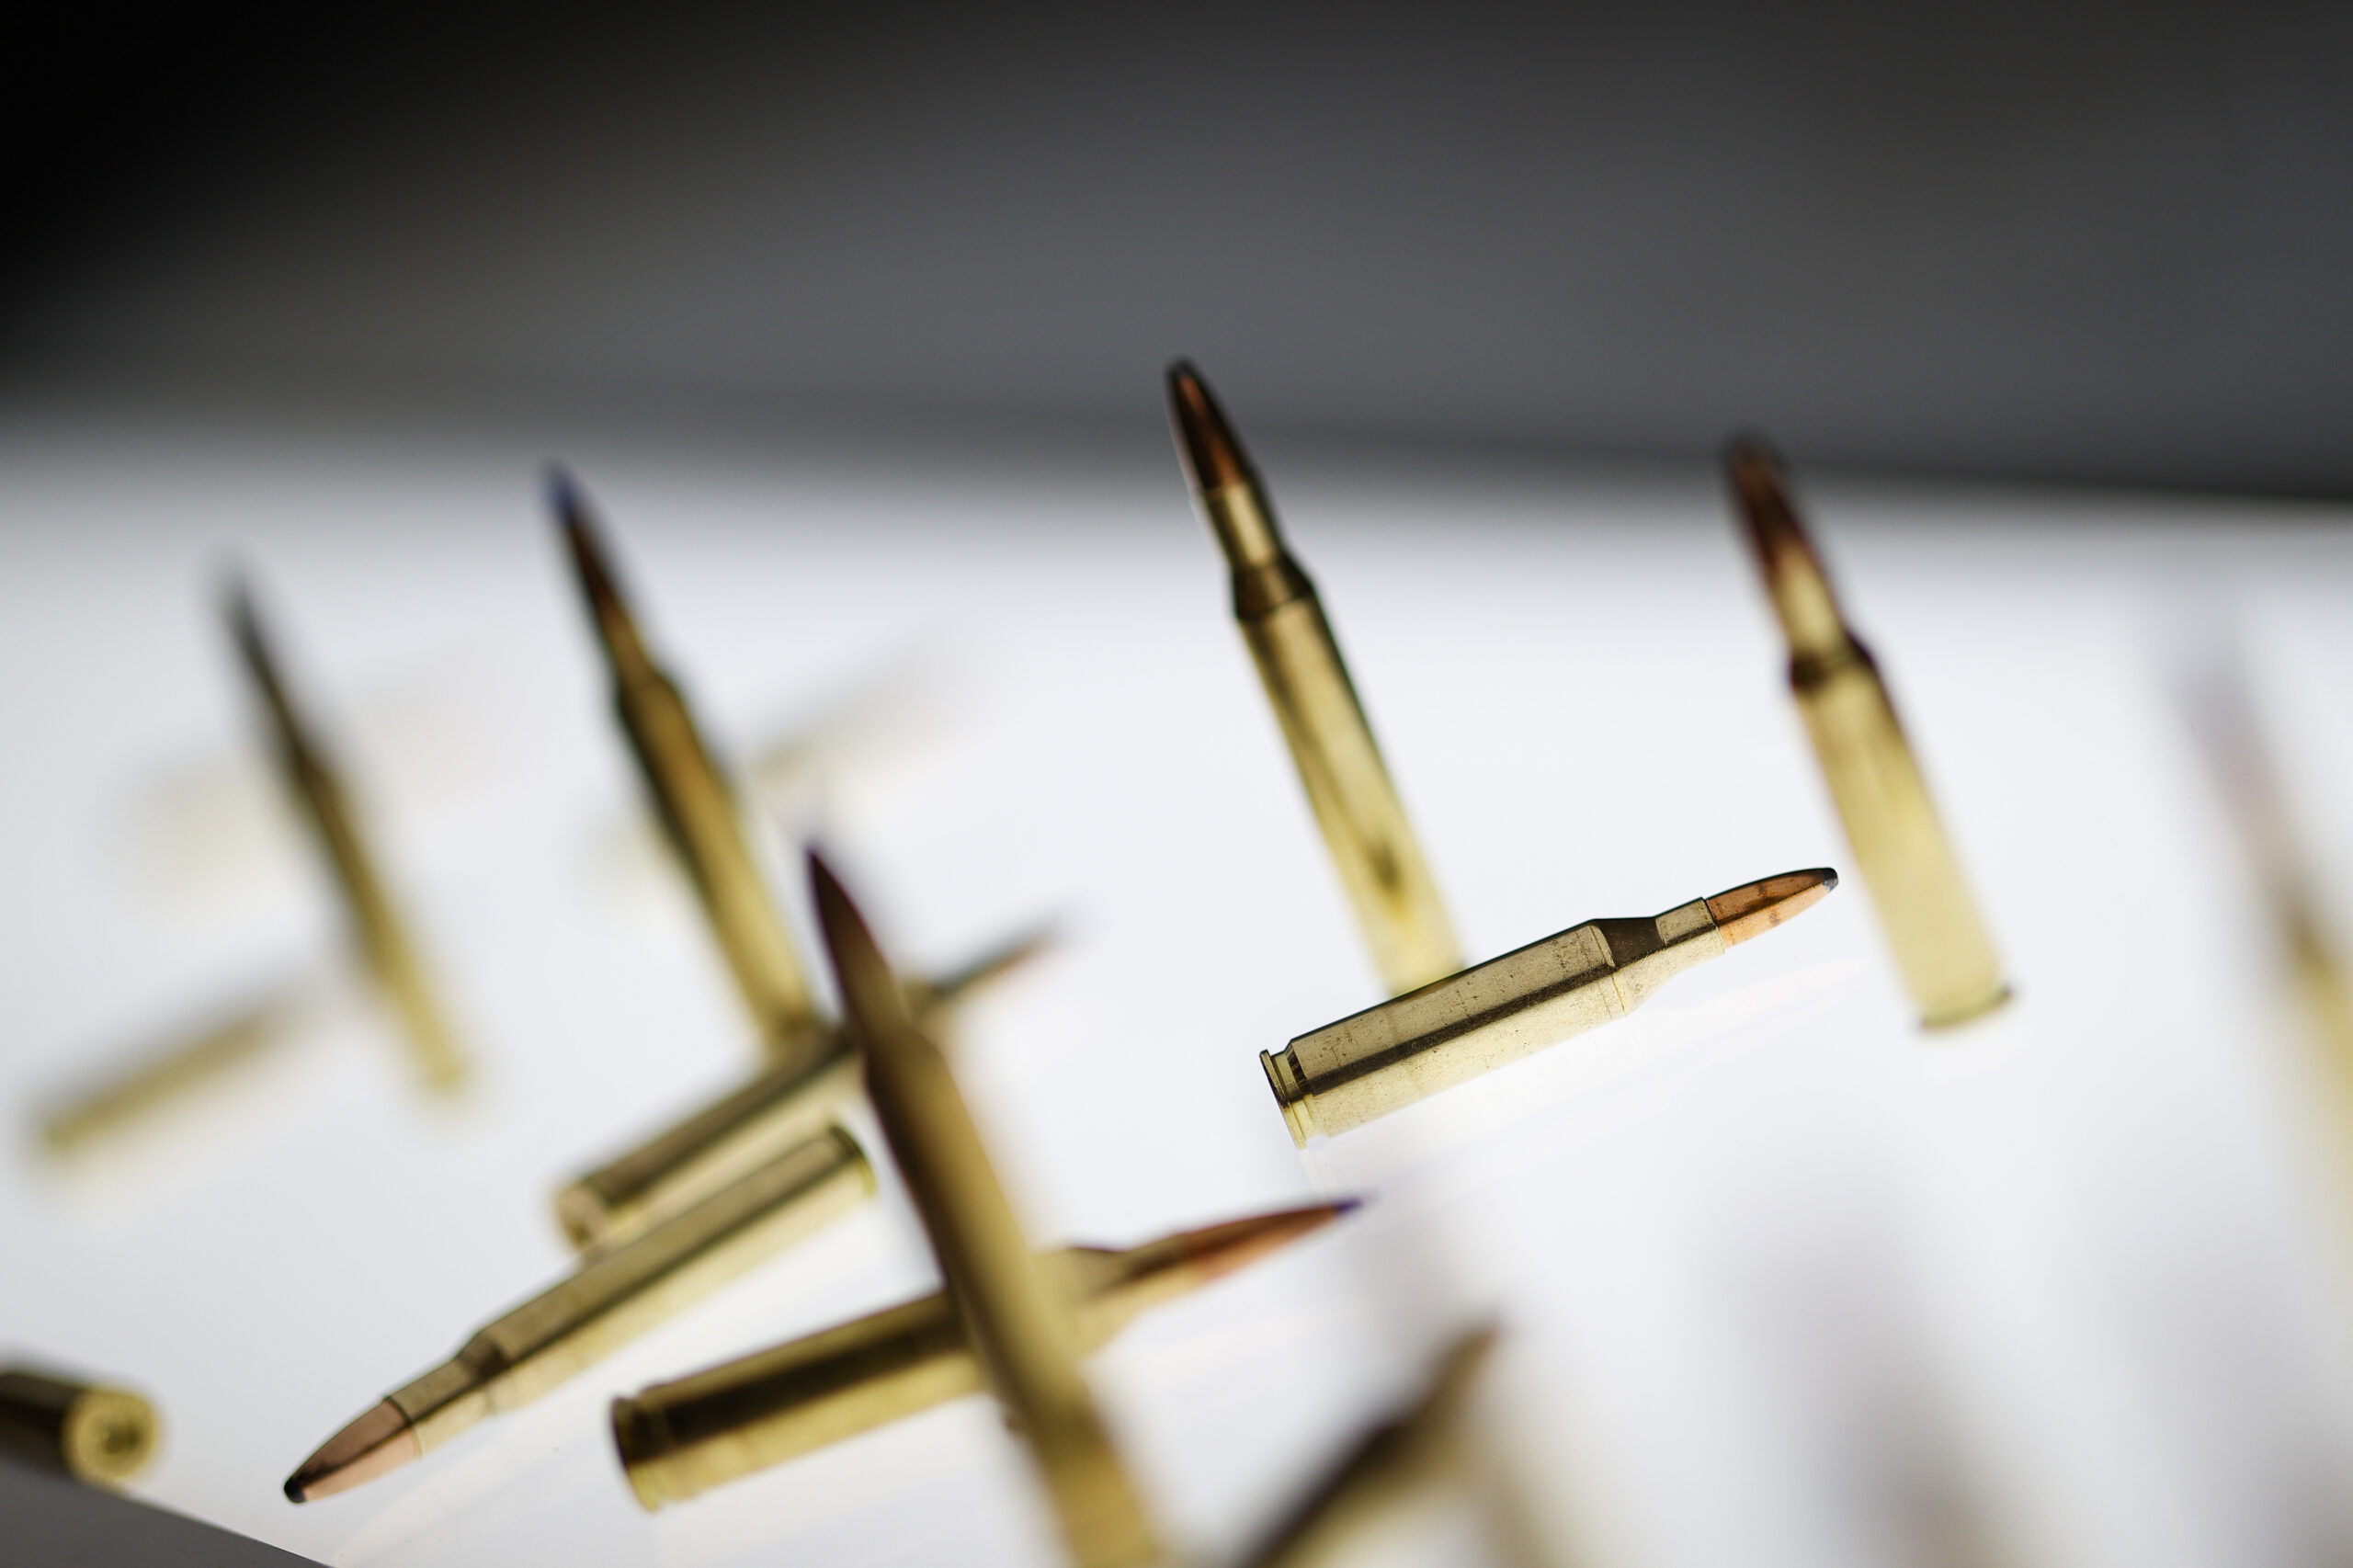 What Is a Caliber System, and How Does It Affect Ammunition Design